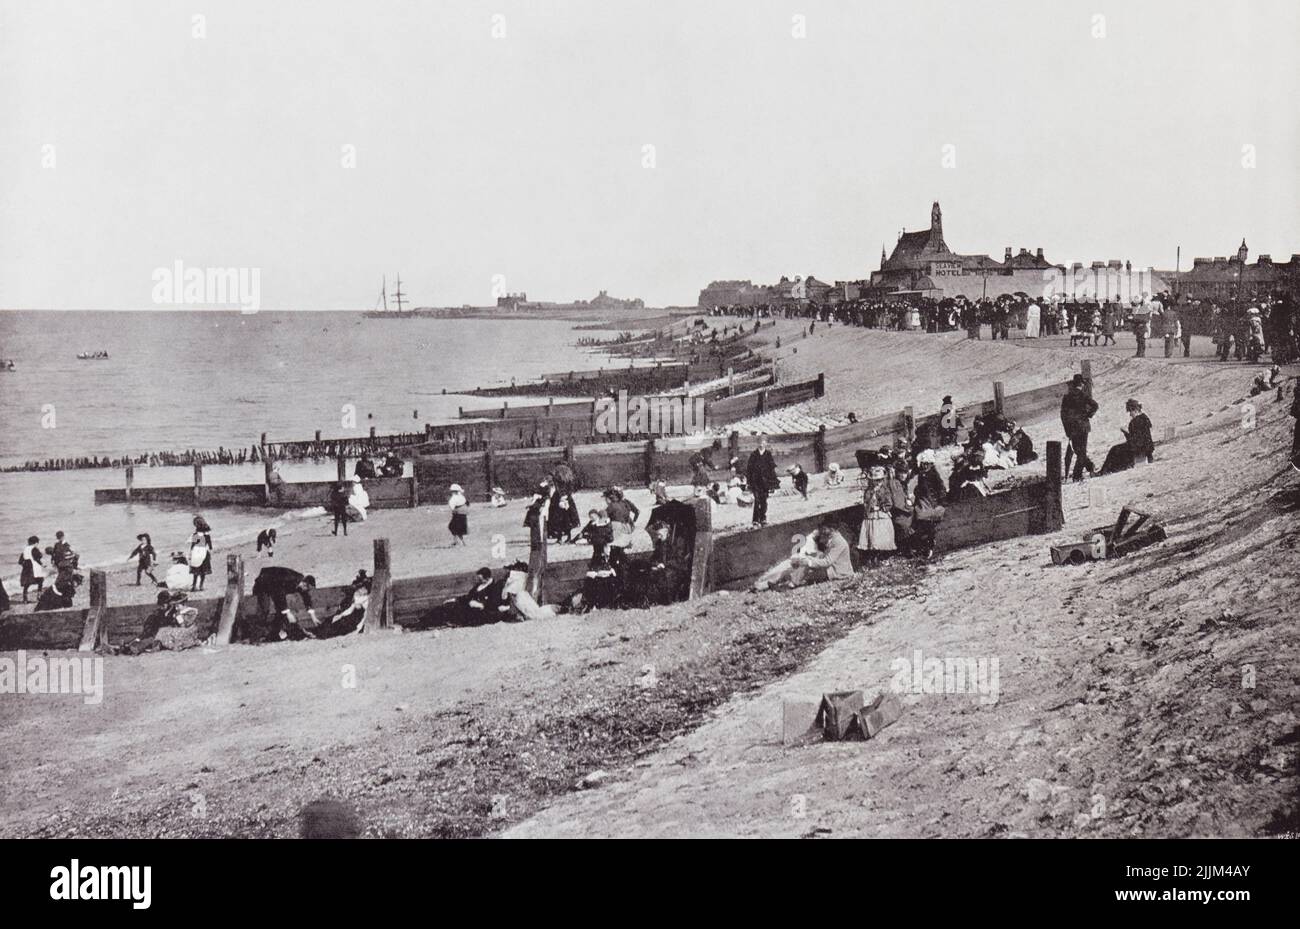 Sheerness, Isle of Sheppey, north Kent, England.  The promenade and beach, seen here in the 19th century.  From Around The Coast,  An Album of Pictures from Photographs of the Chief Seaside Places of Interest in Great Britain and Ireland published London, 1895, by George Newnes Limited. Stock Photo